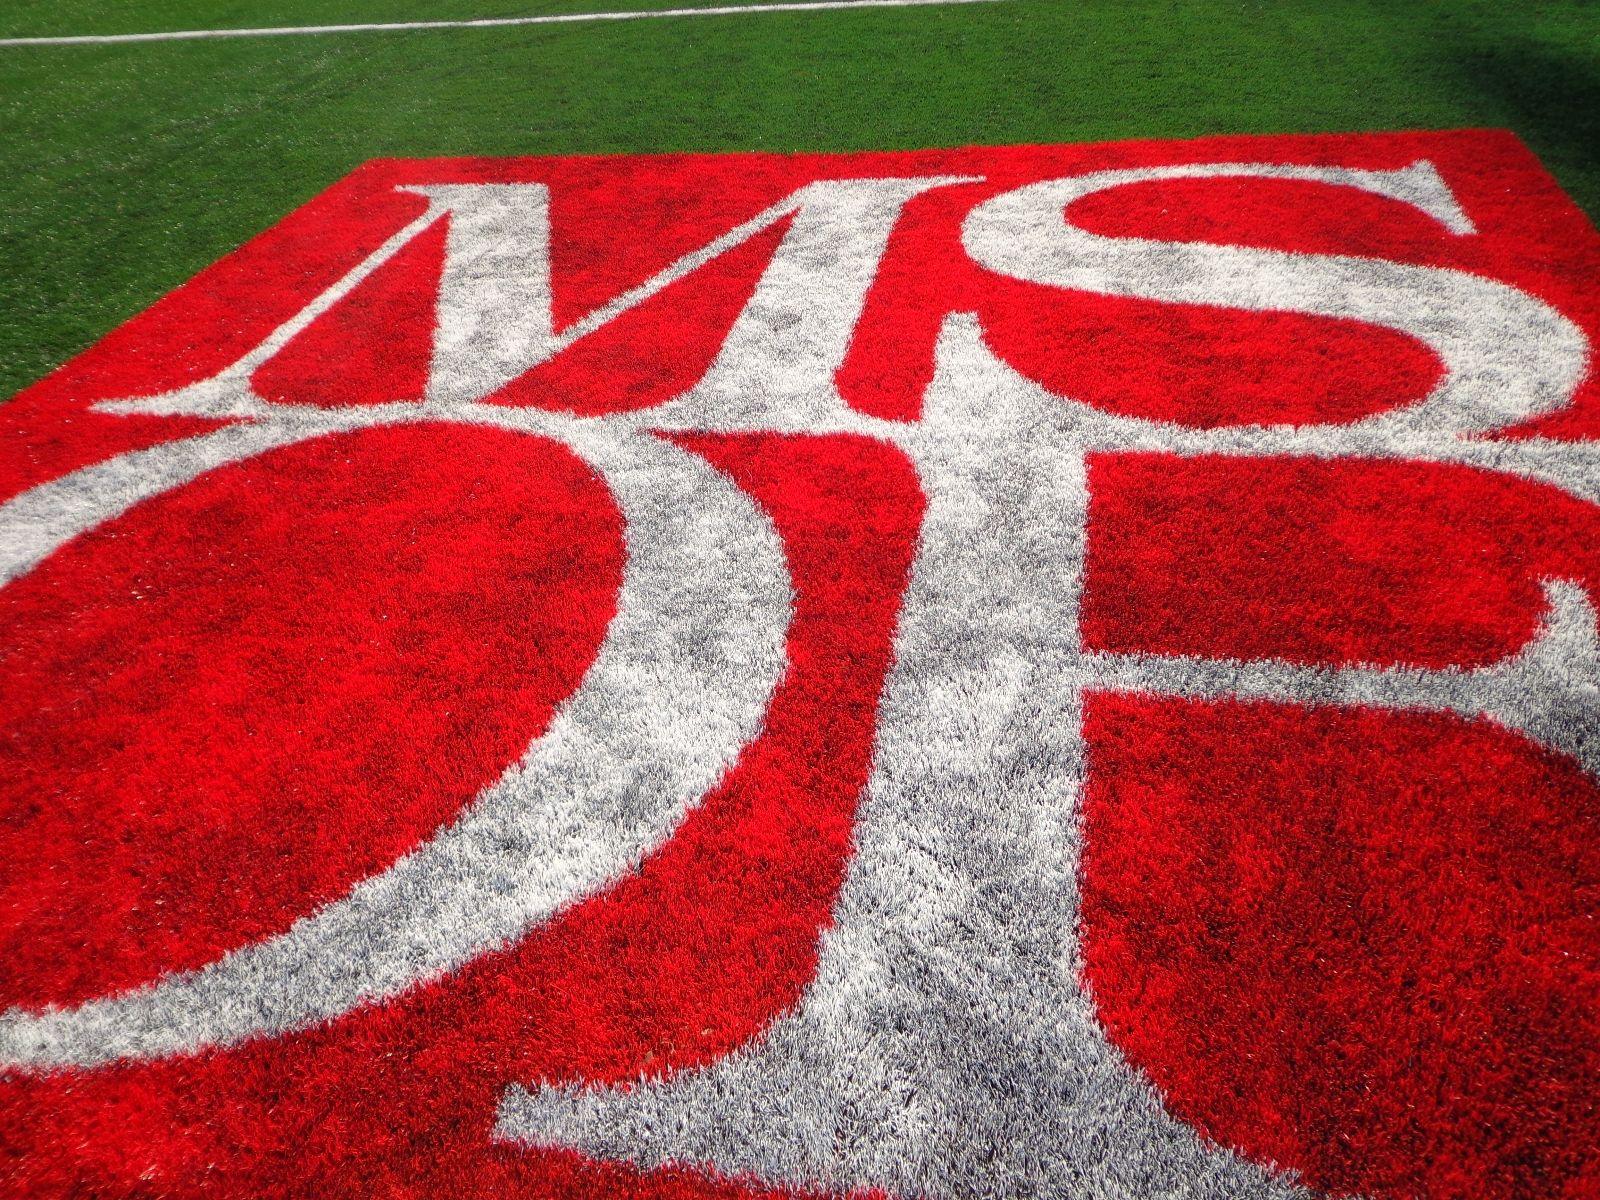 MSOE Logo - MSOE Athletic Field and Parking Complex » Urban Milwaukee